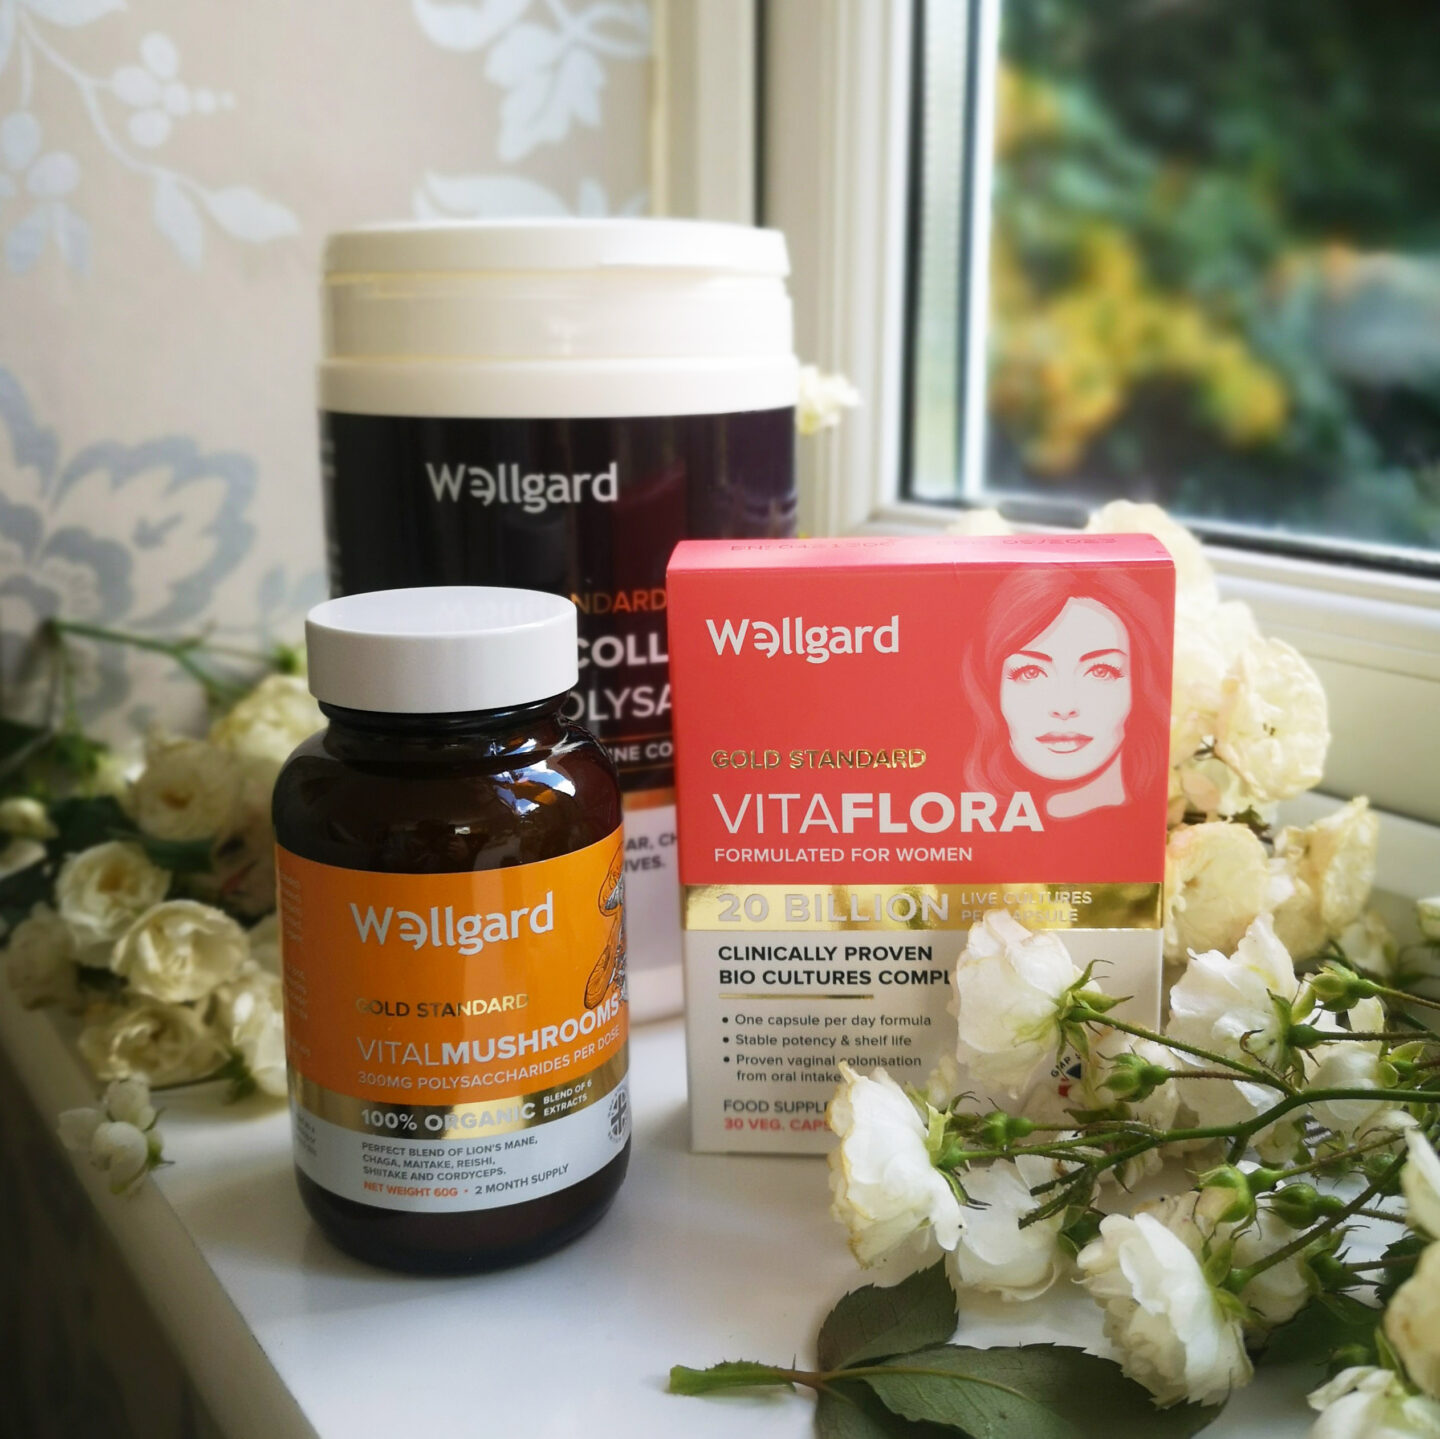  Wellgard Lot, Wellgard, Food Supplements, Probiotics, Wellness, Well-being, Collagen Powder, Giveaway, Win, Competition, the Frenchie Mummy